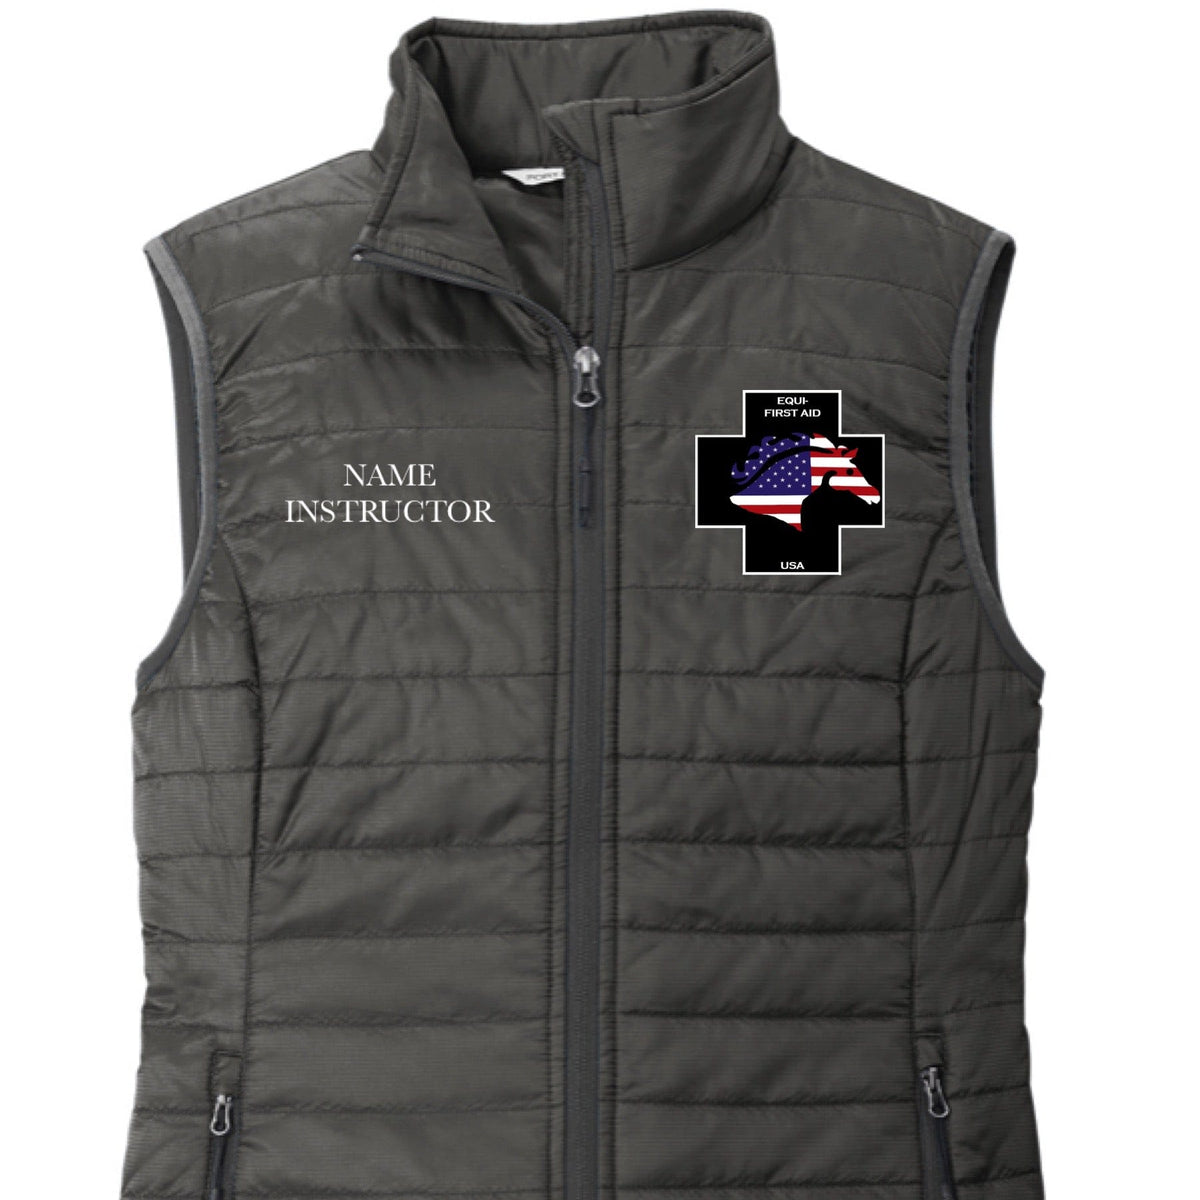 Equestrian Team Apparel Equi-First Aid USA Puffy Vest equestrian team apparel online tack store mobile tack store custom farm apparel custom show stable clothing equestrian lifestyle horse show clothing riding clothes horses equestrian tack store